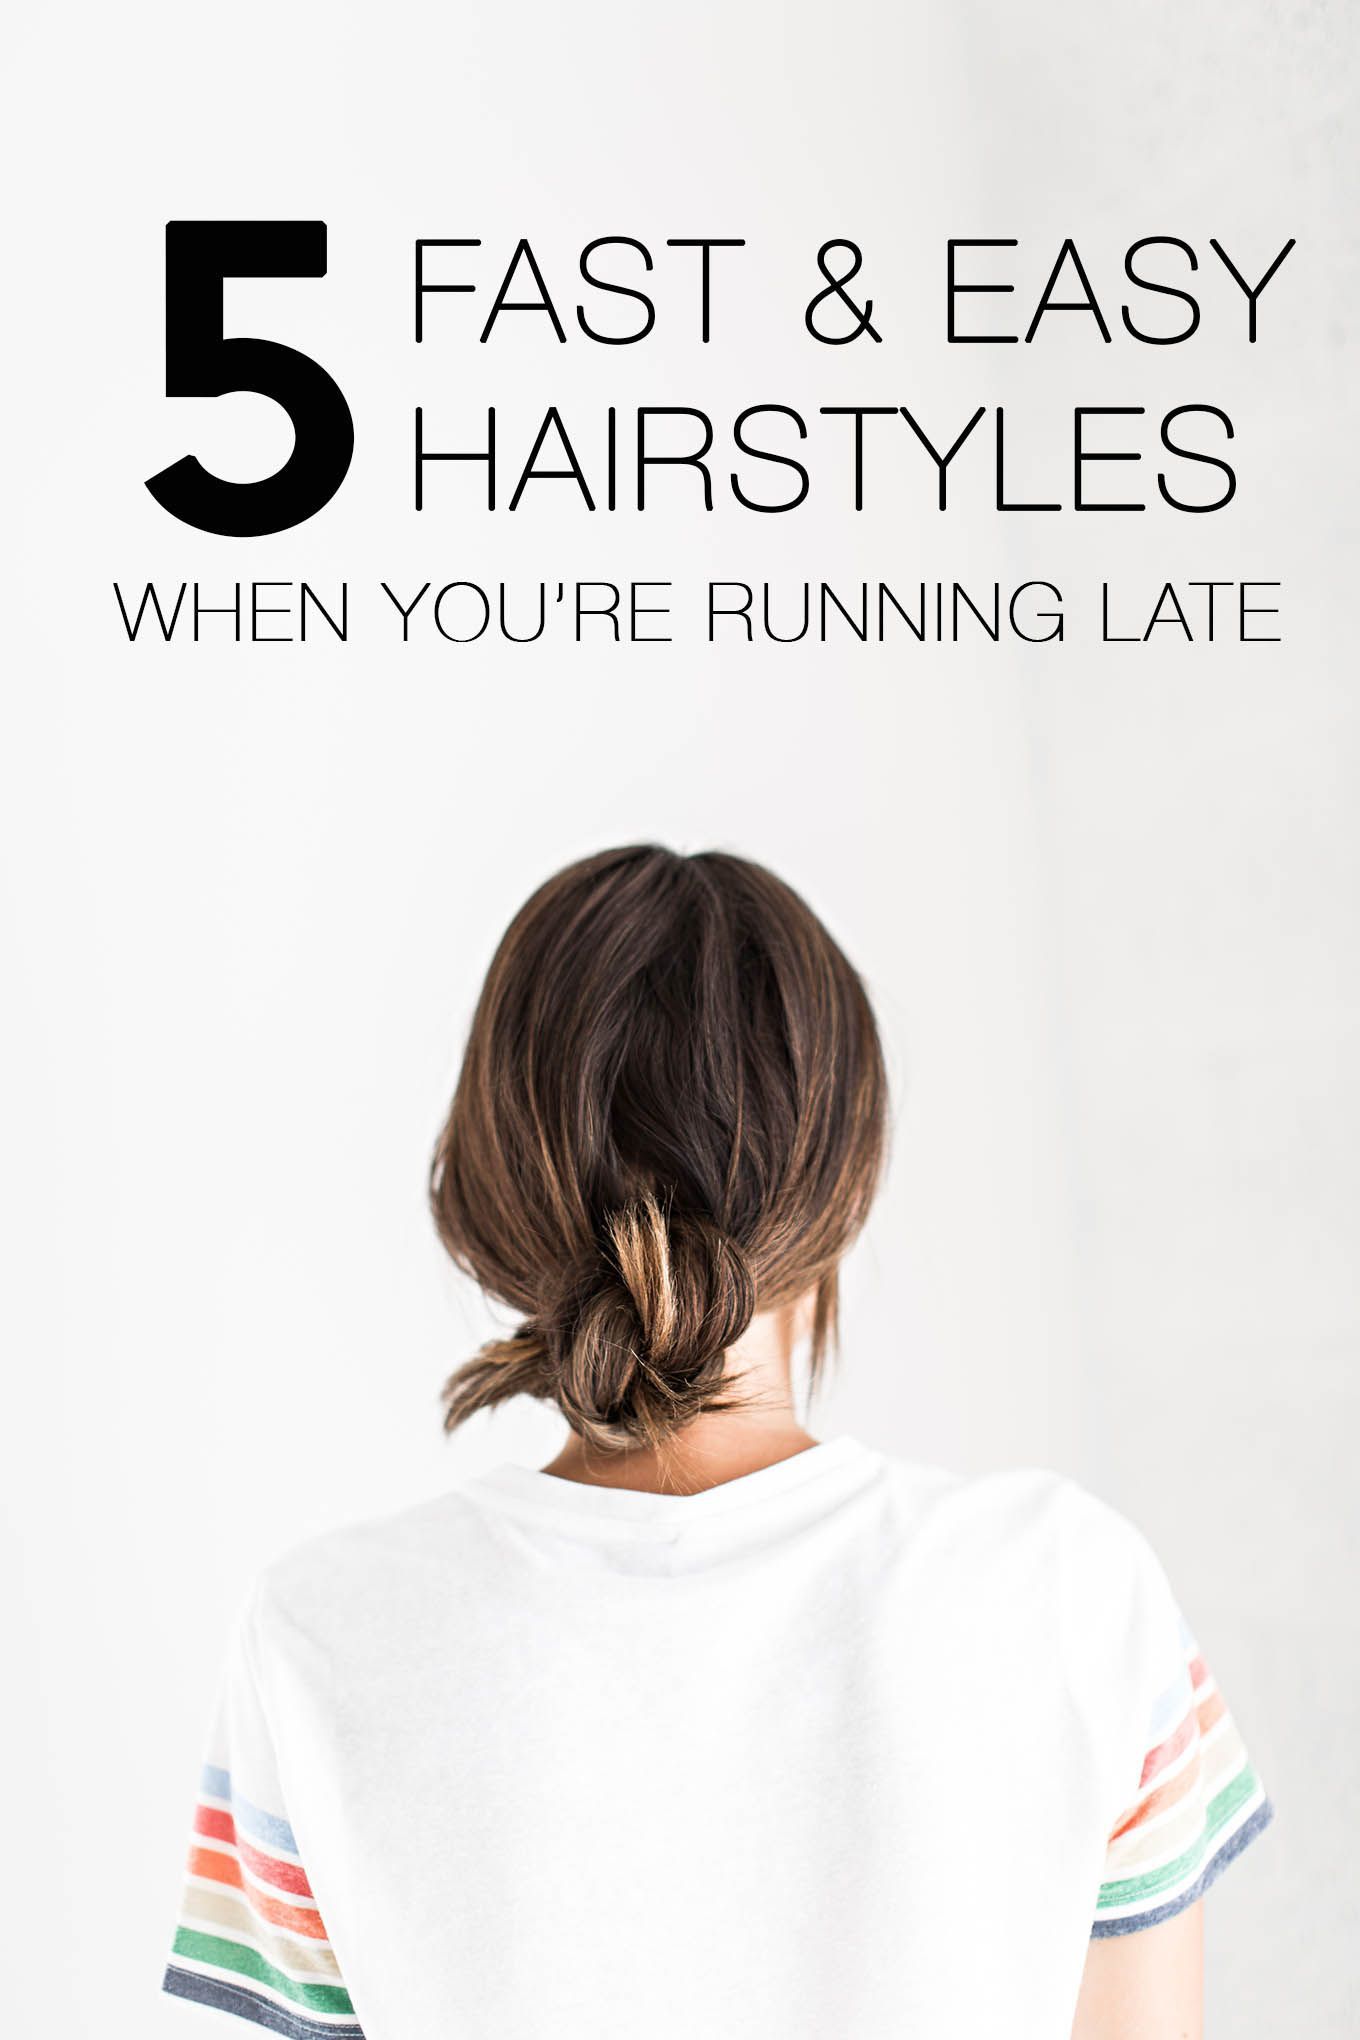 5 Fast & Easy Hairstyle For When You're Running Late -   14 teacher hairstyles Easy ideas